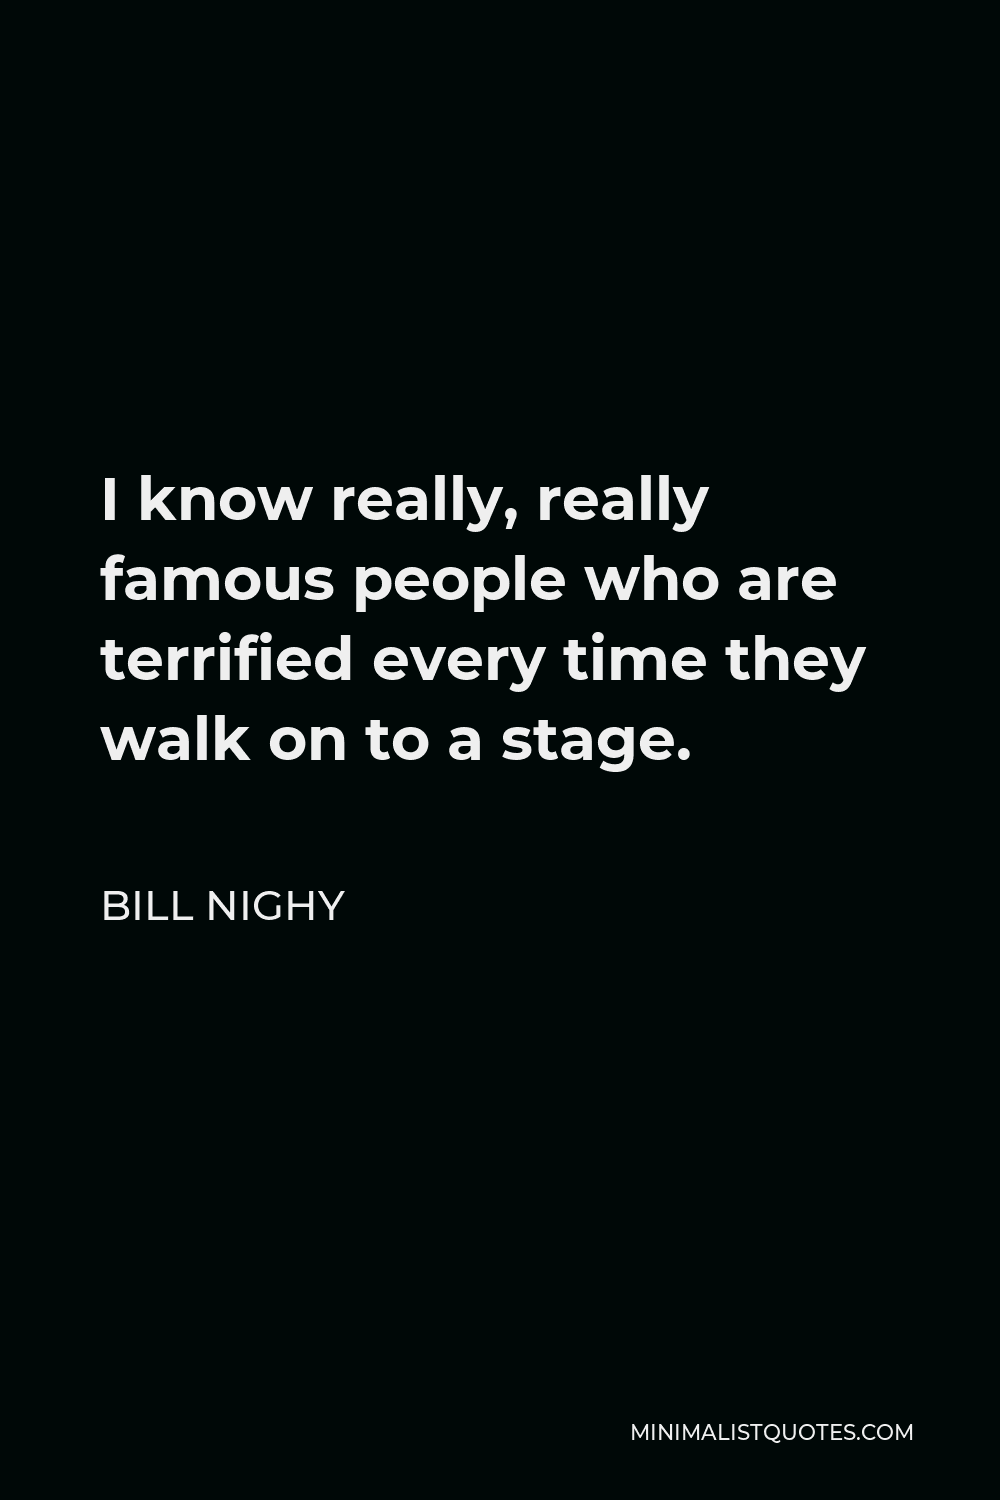 Bill Nighy Quote - I know really, really famous people who are terrified every time they walk on to a stage.